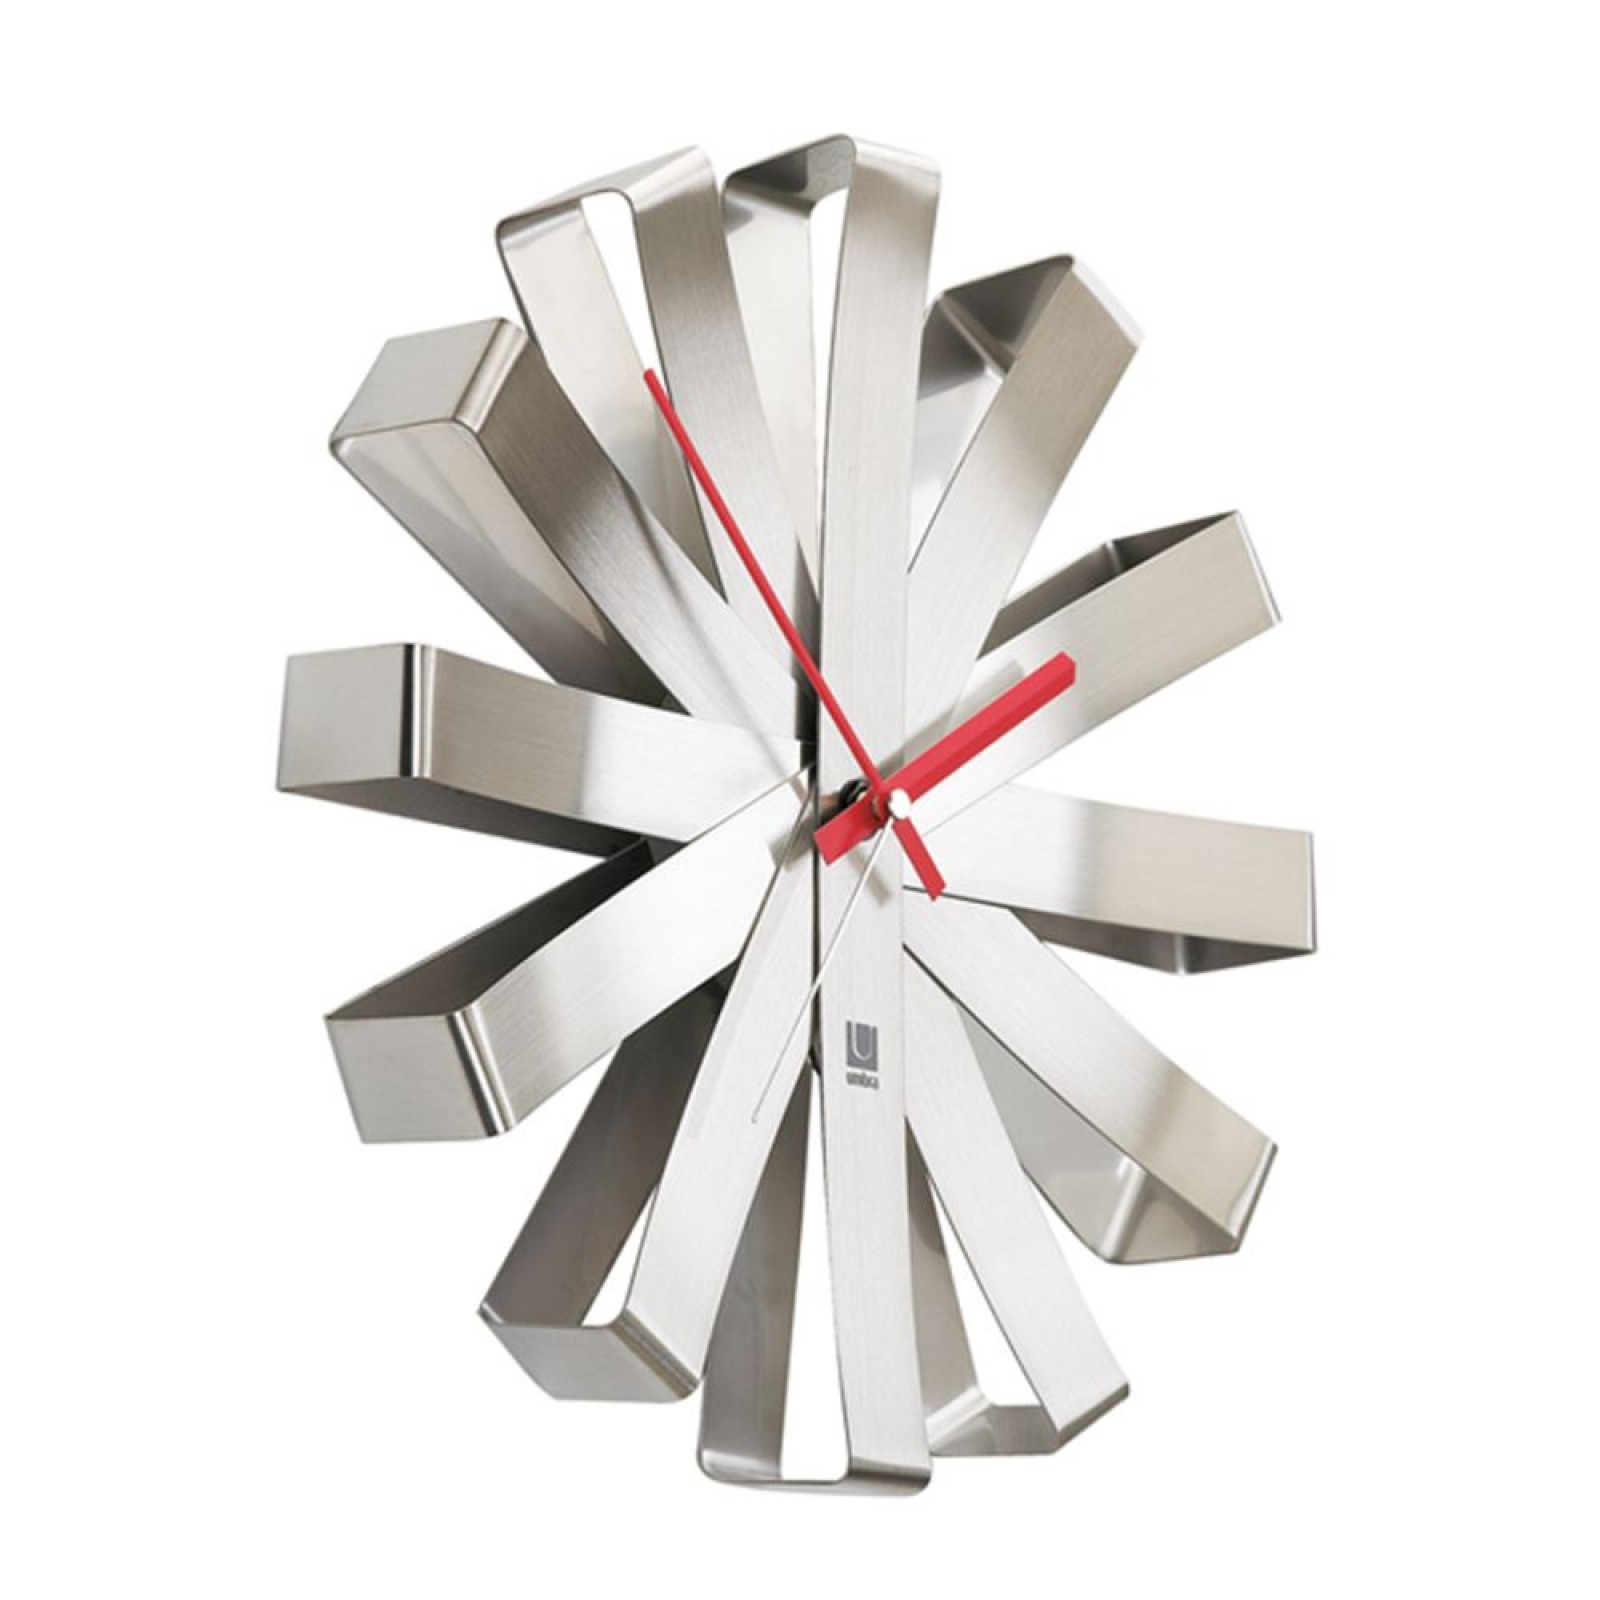 Umbra 12" Ribbon Brushed Stainless Steel Wall Clock 118070-590 